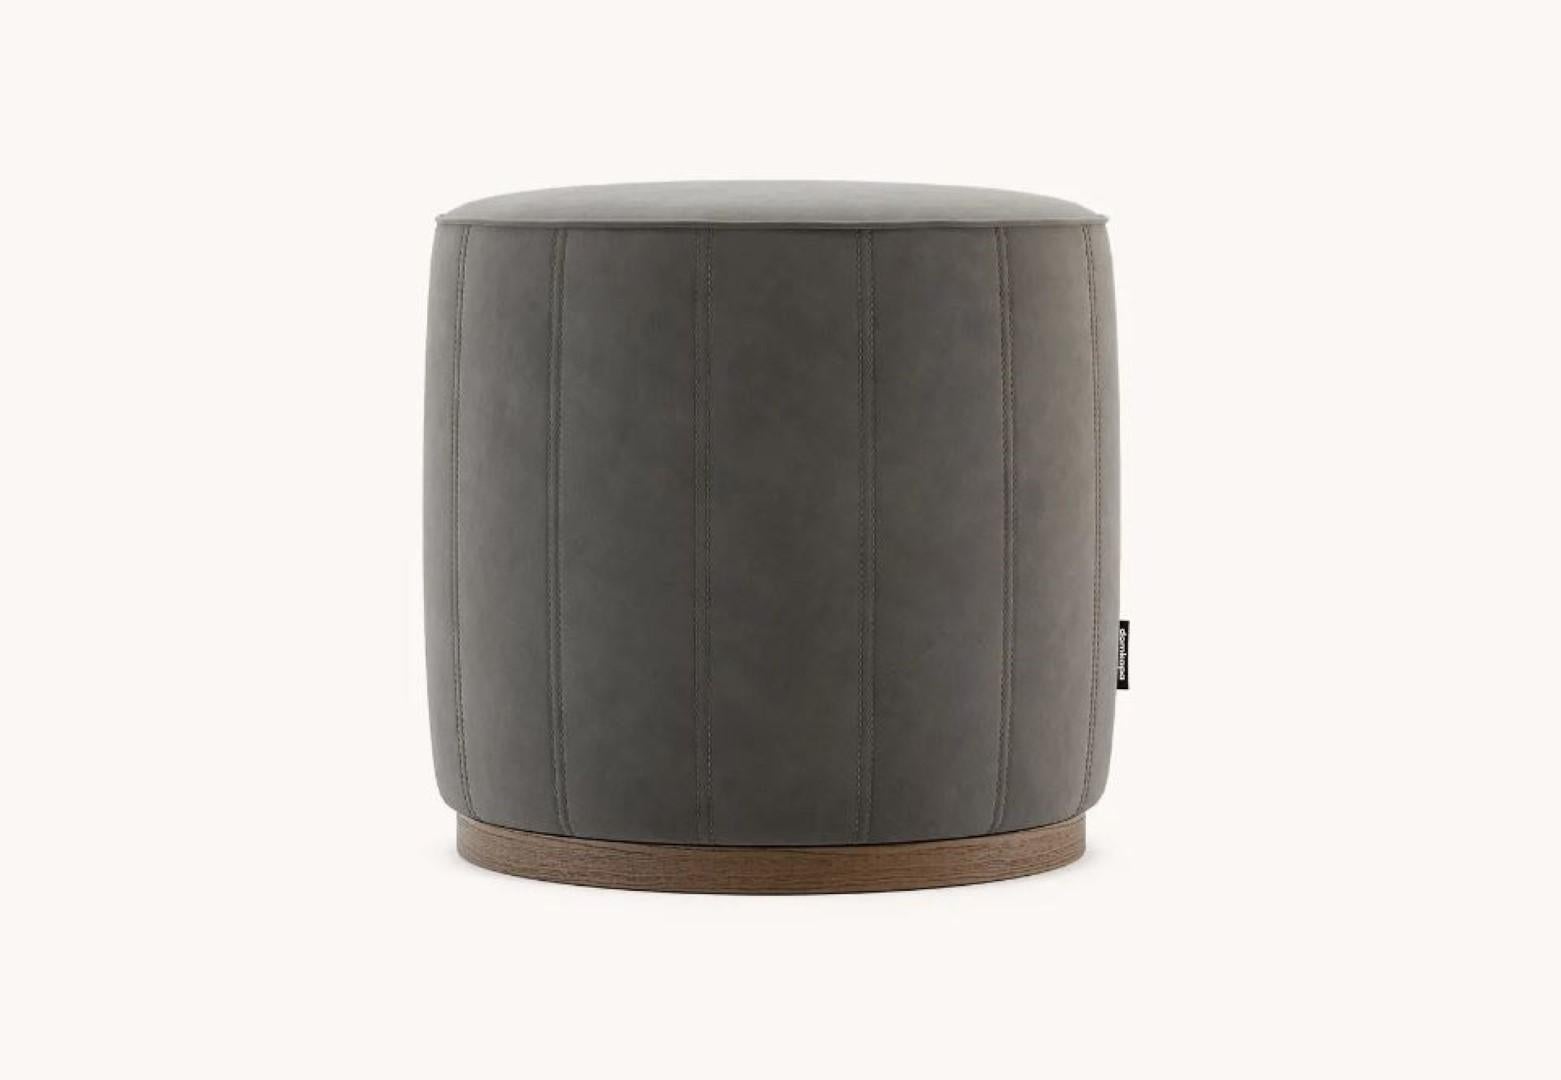 Low Pouf by Domkapa
Materials: Natural Leather, Ash, Upholstery. 
Dimensions:  W 47 x D 47 x H 48 cm. 
Also available in different materials. Please contact us.

Low pouf embraces a classic design in its subtle shapes. Its round shape is fully